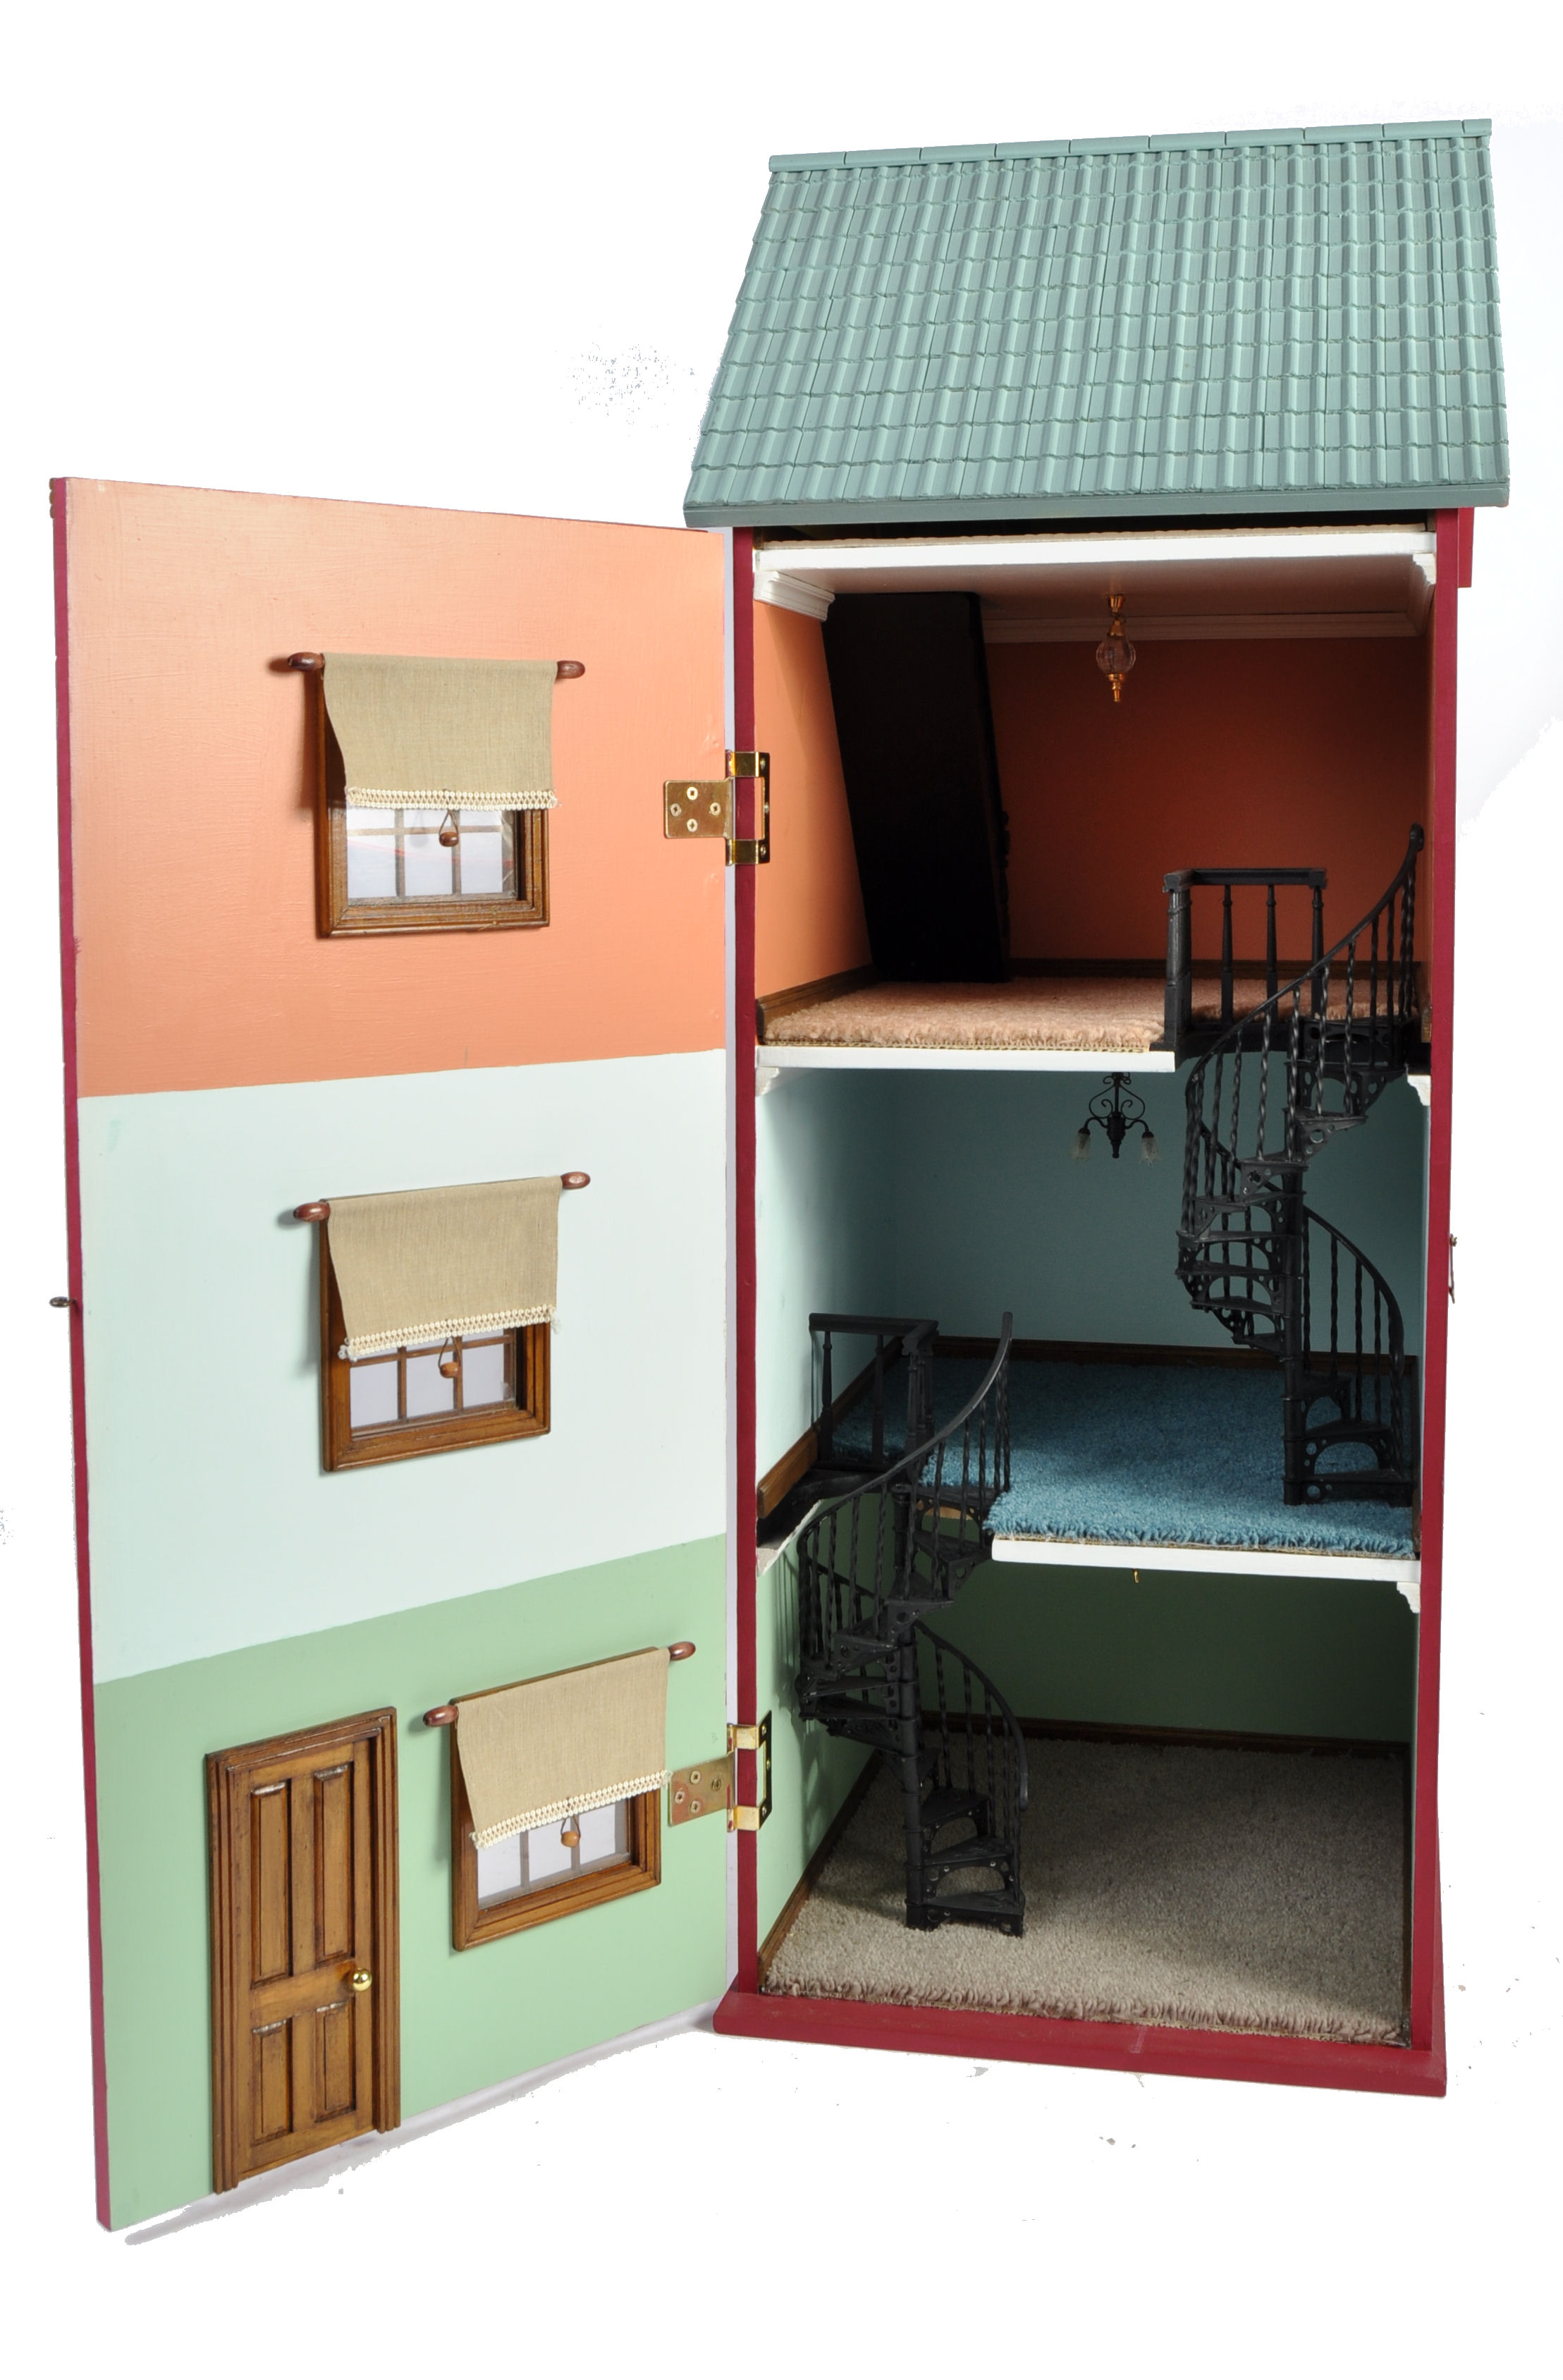 PRIVATE COLLECTION OF DOLL'S HOUSES - LILISAM ODDS & BOBS SHOP - Image 3 of 6